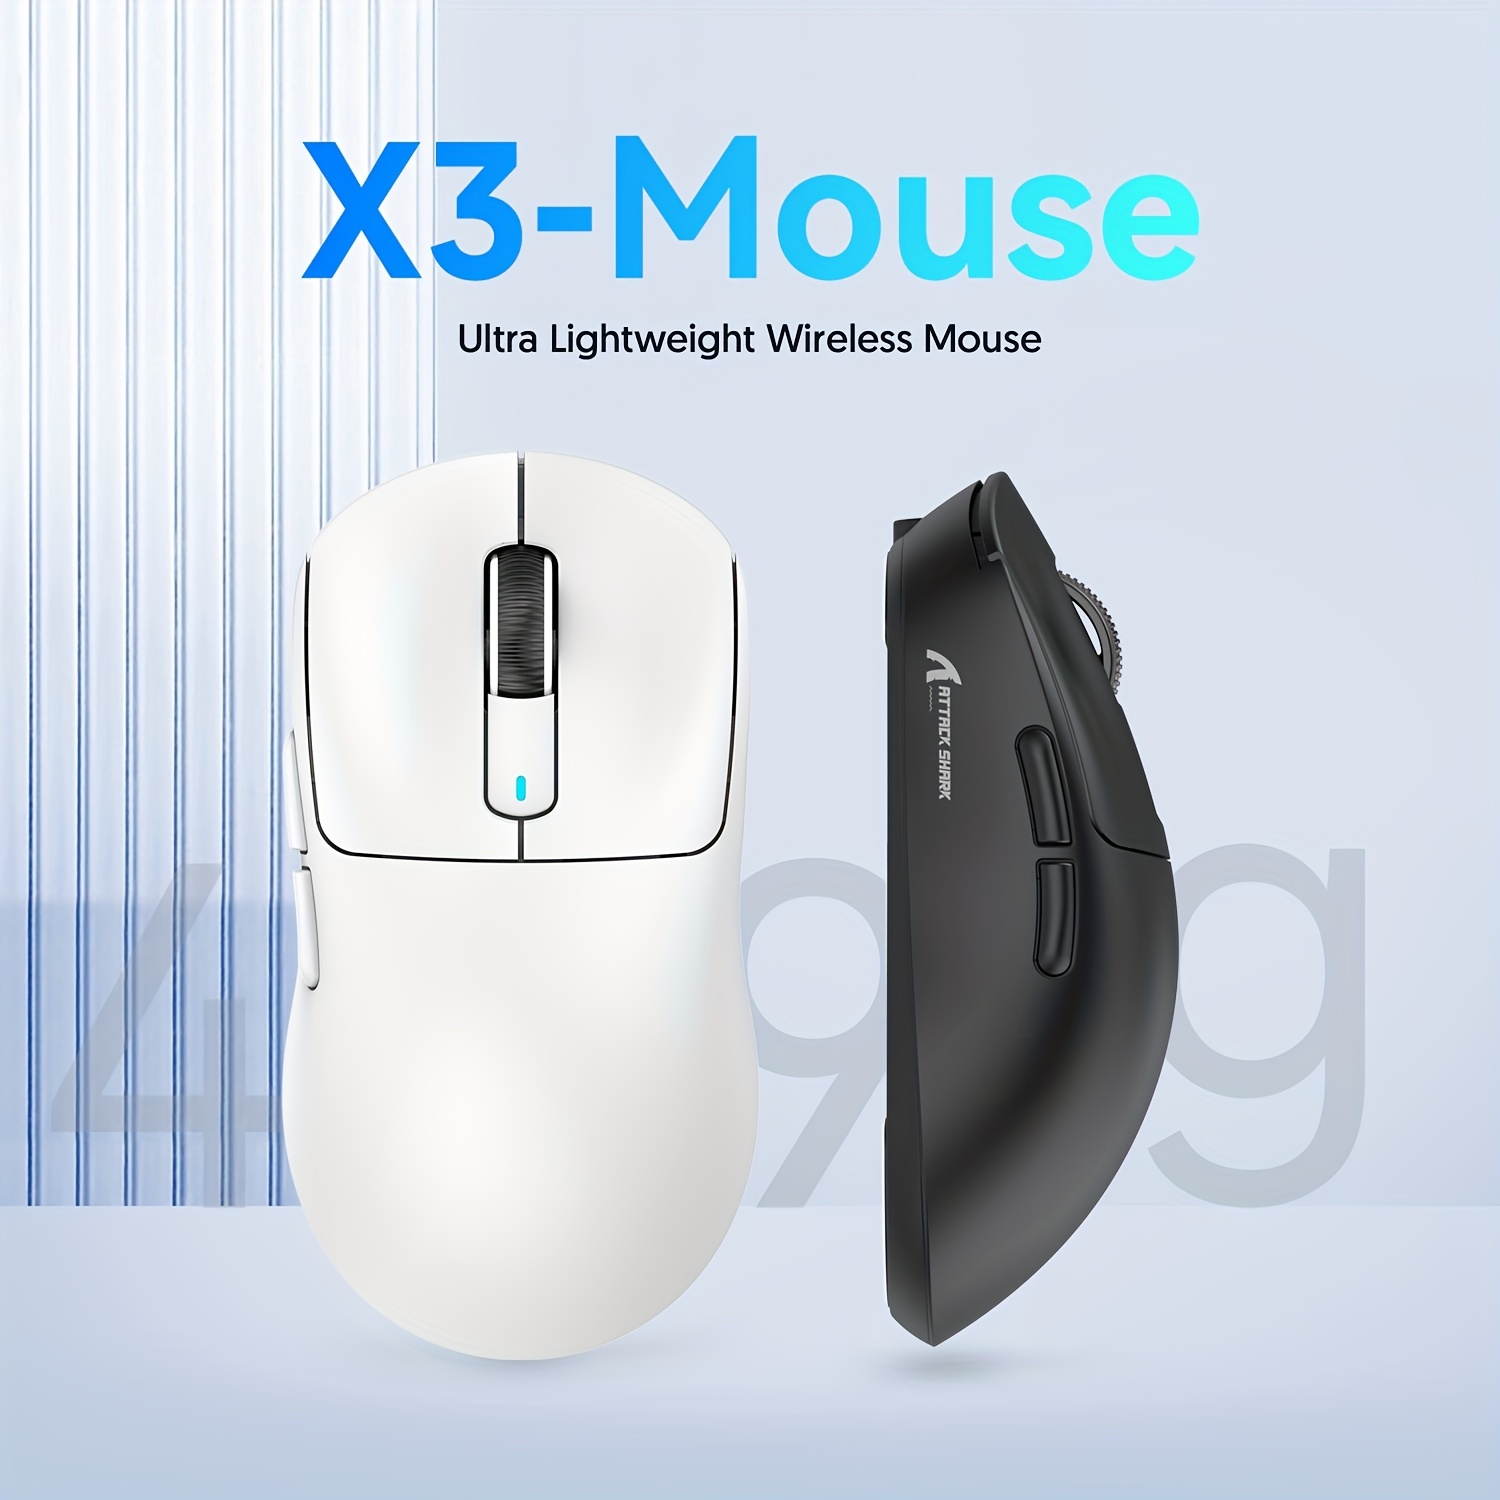  ATTACK SHARK X6 Lightweight Wireless Gaming Mouse